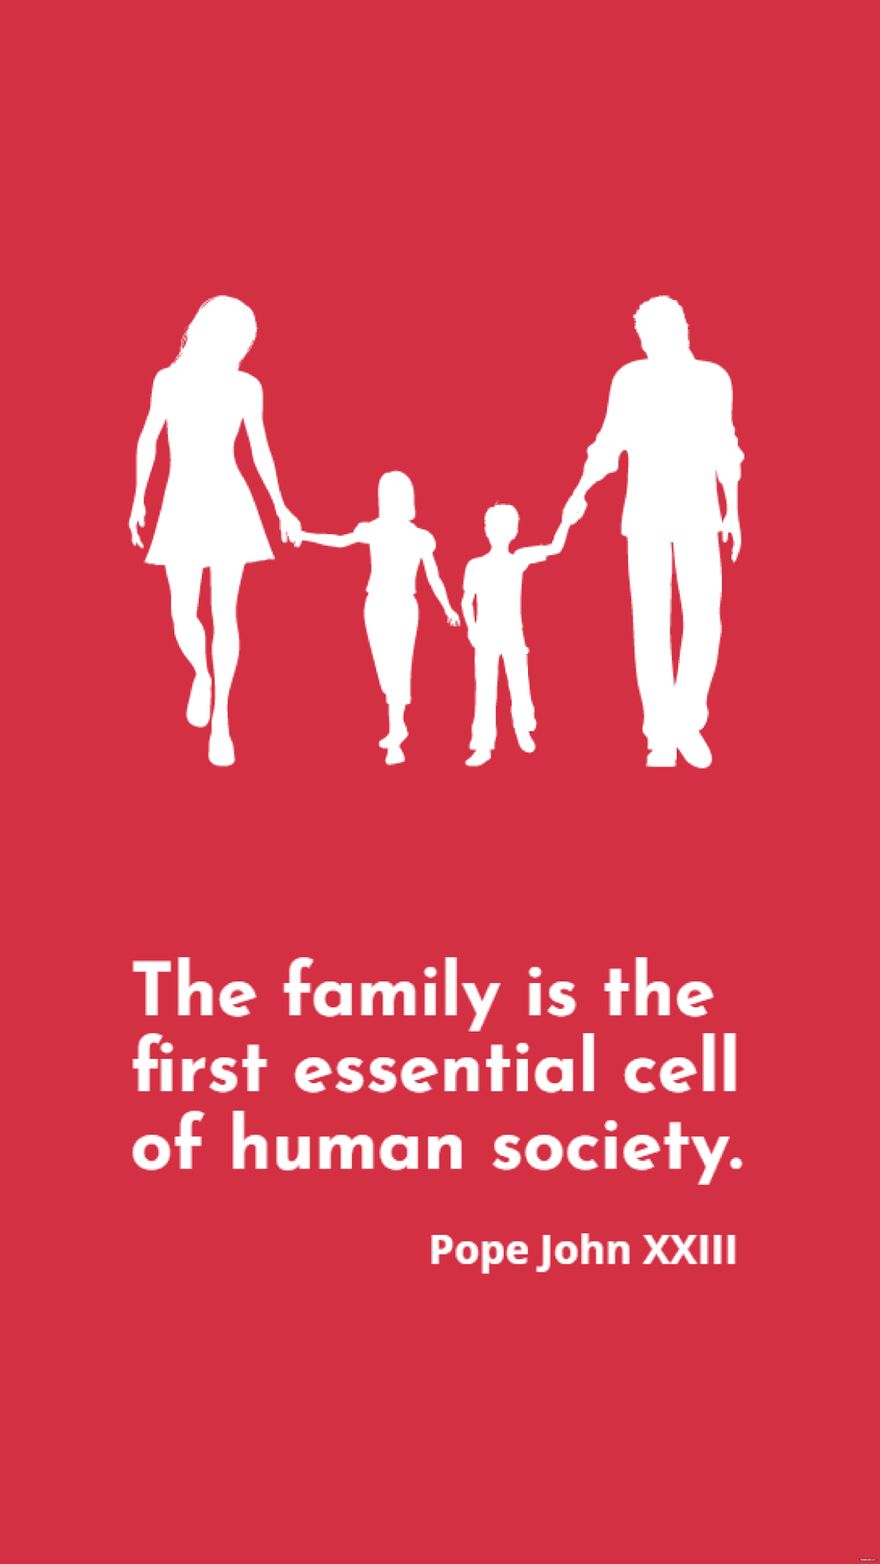 Free Pope John XXIII - The family is the first essential cell of human society.